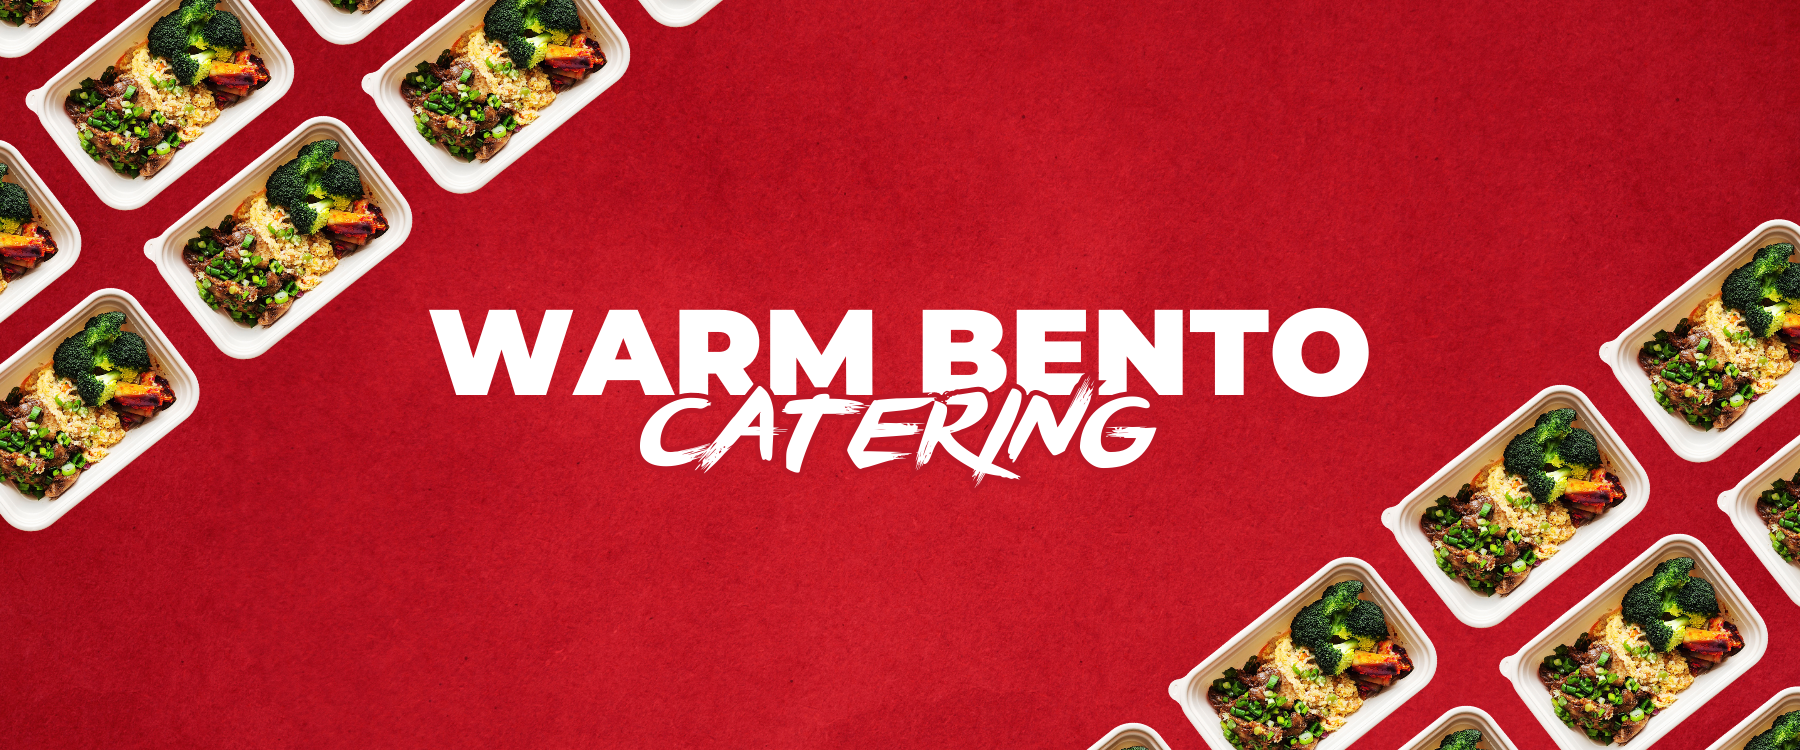 Warm Bento Catering Banner